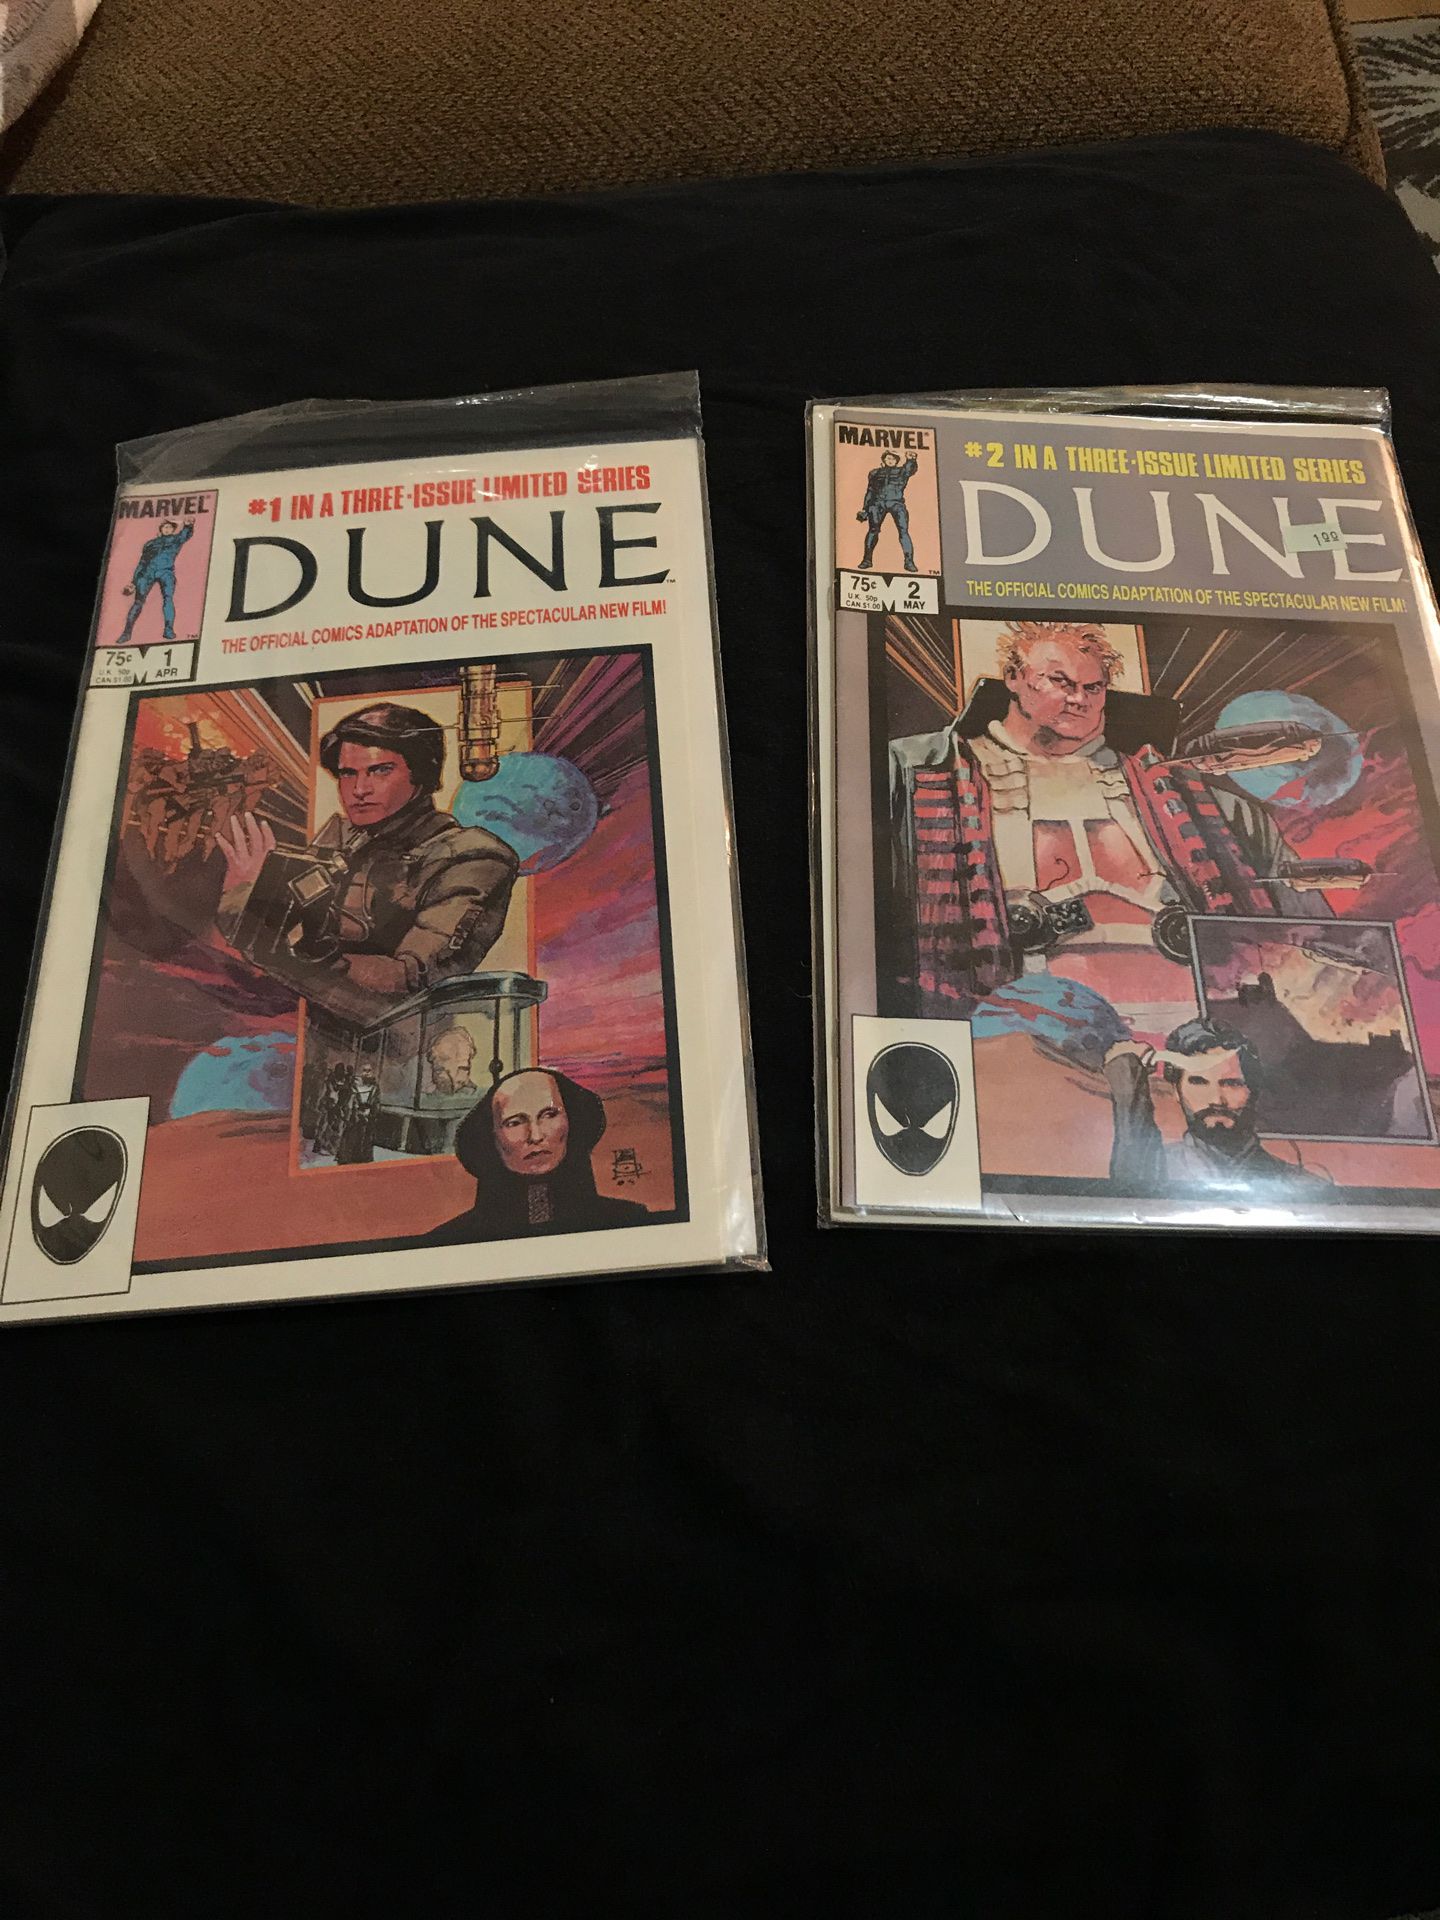 Issue one and number two Dune comic book